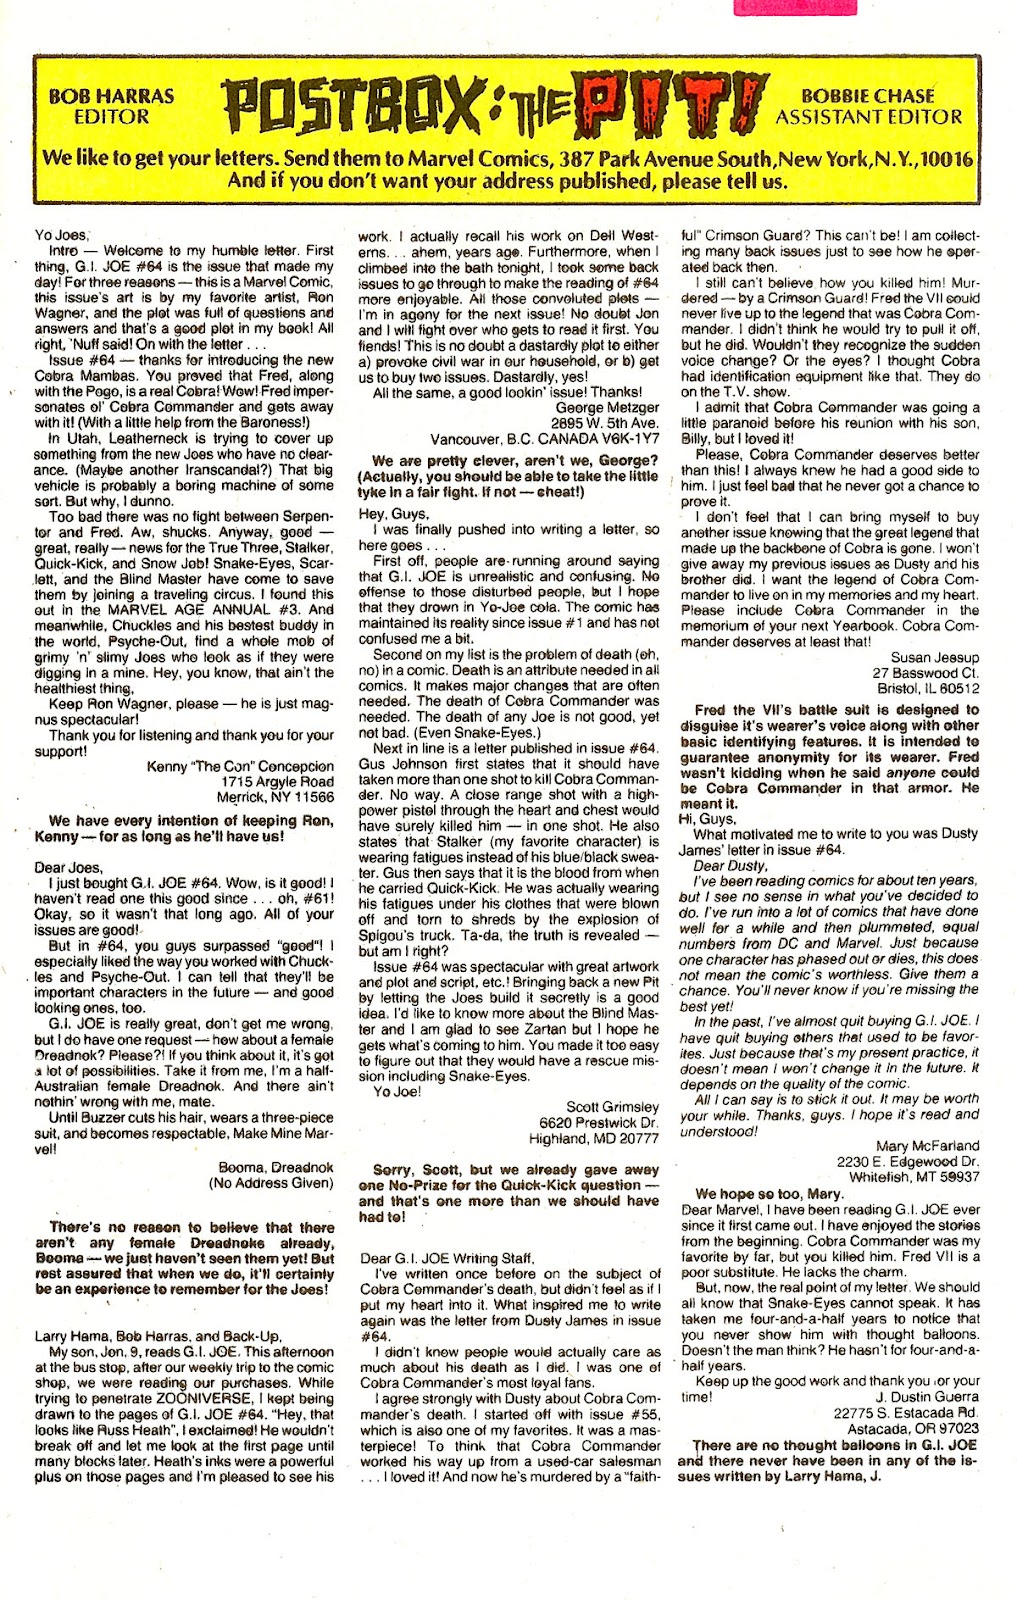 G.I. Joe: A Real American Hero issue 68 - Page 24